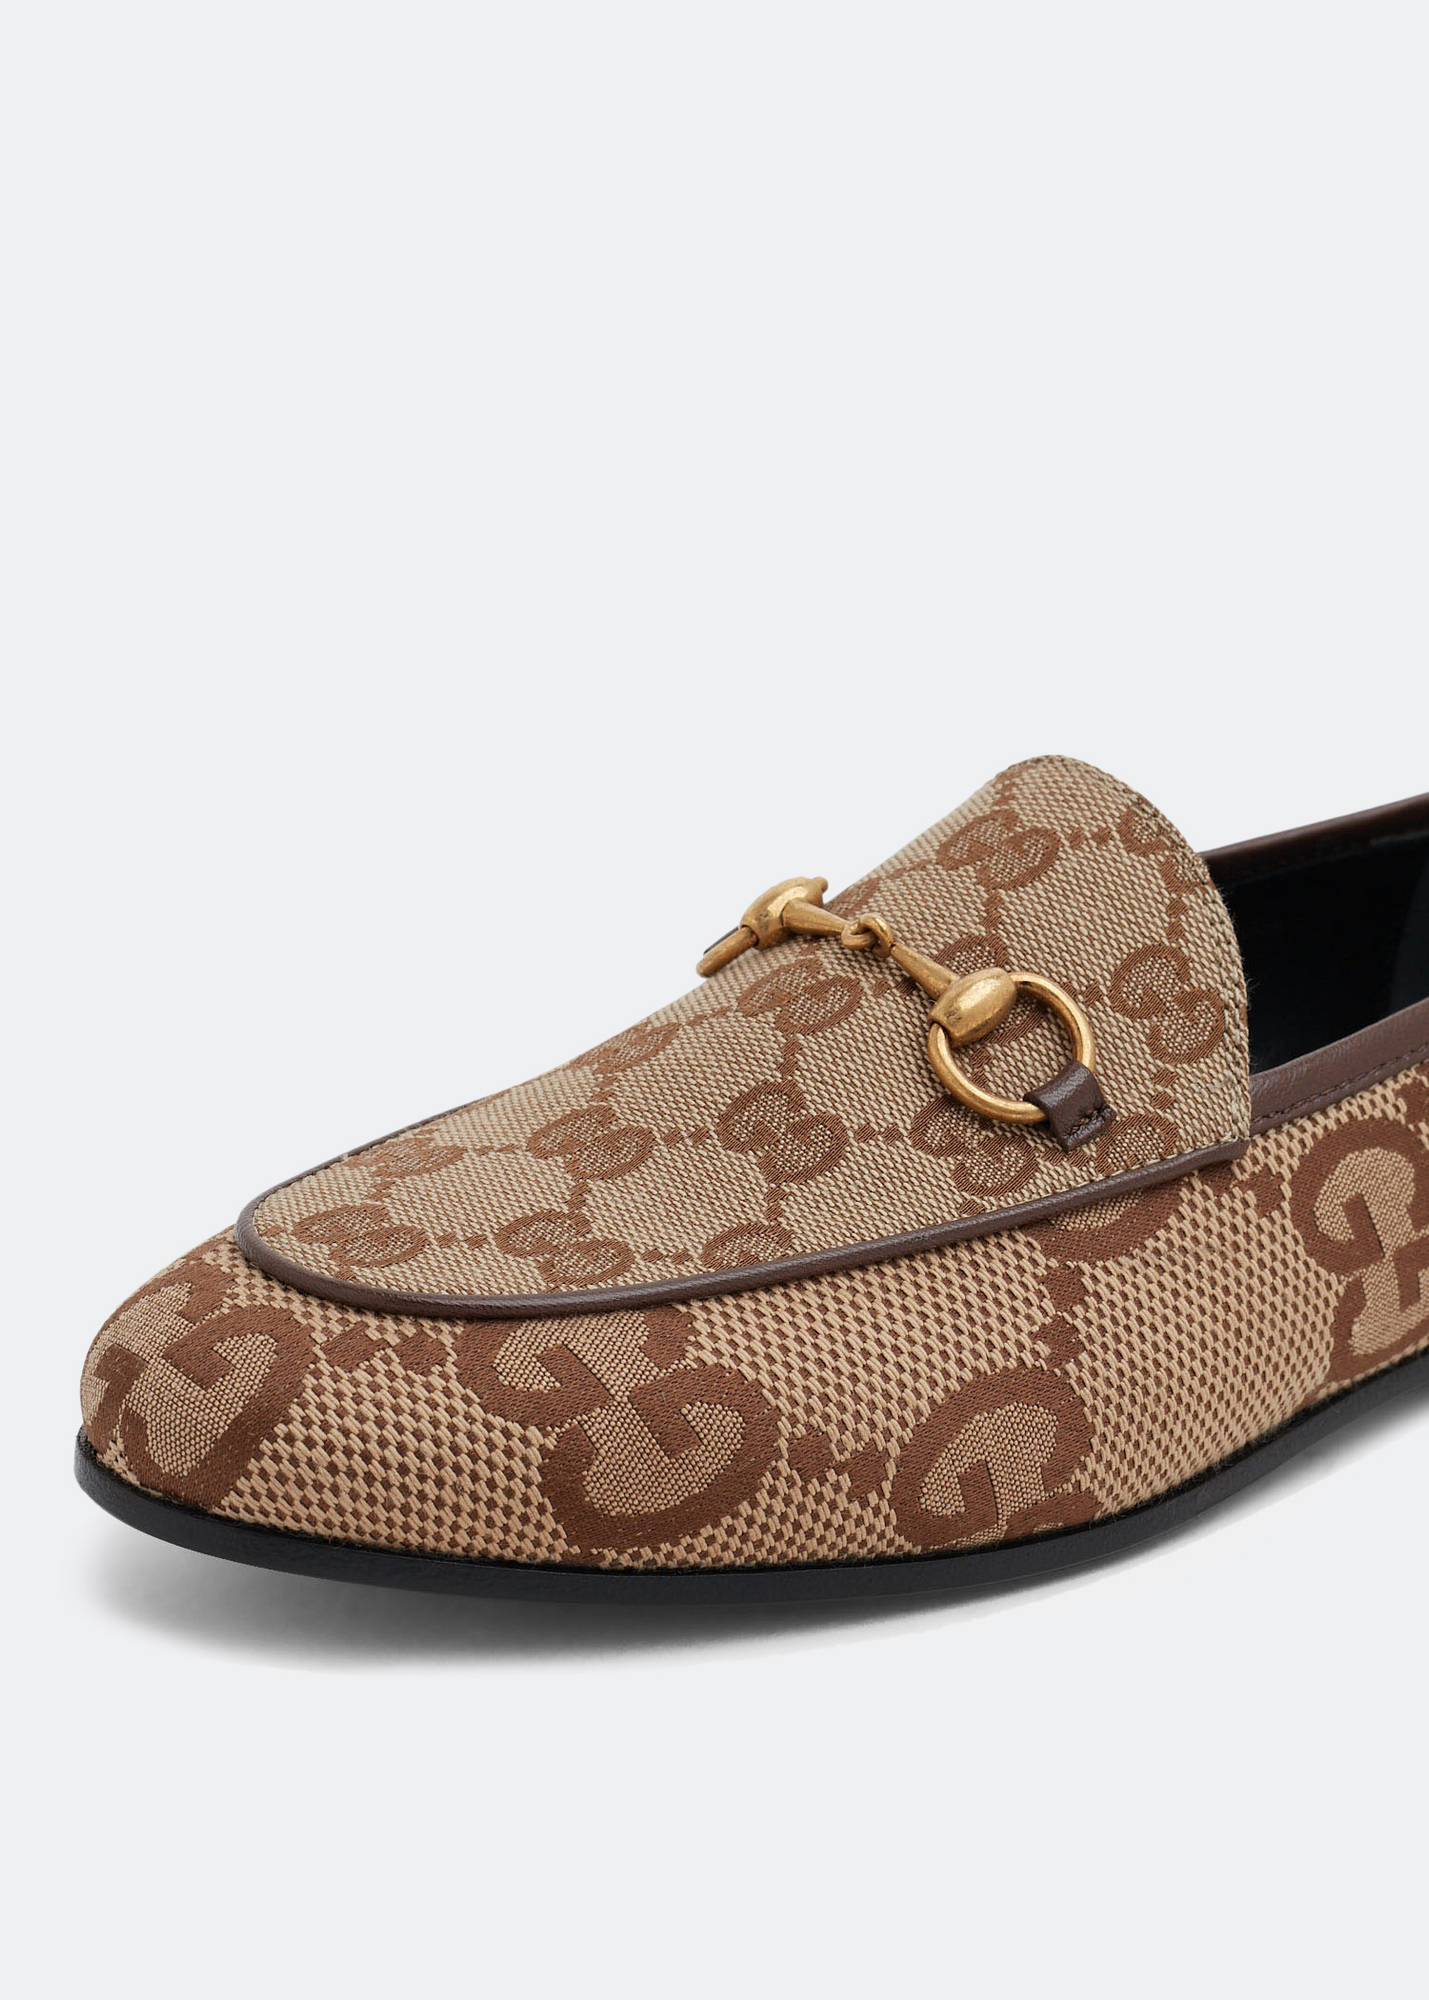 Gucci Women's Jordaan Maxi GG Canvas Loafer - Brown - Loafers - 8.5